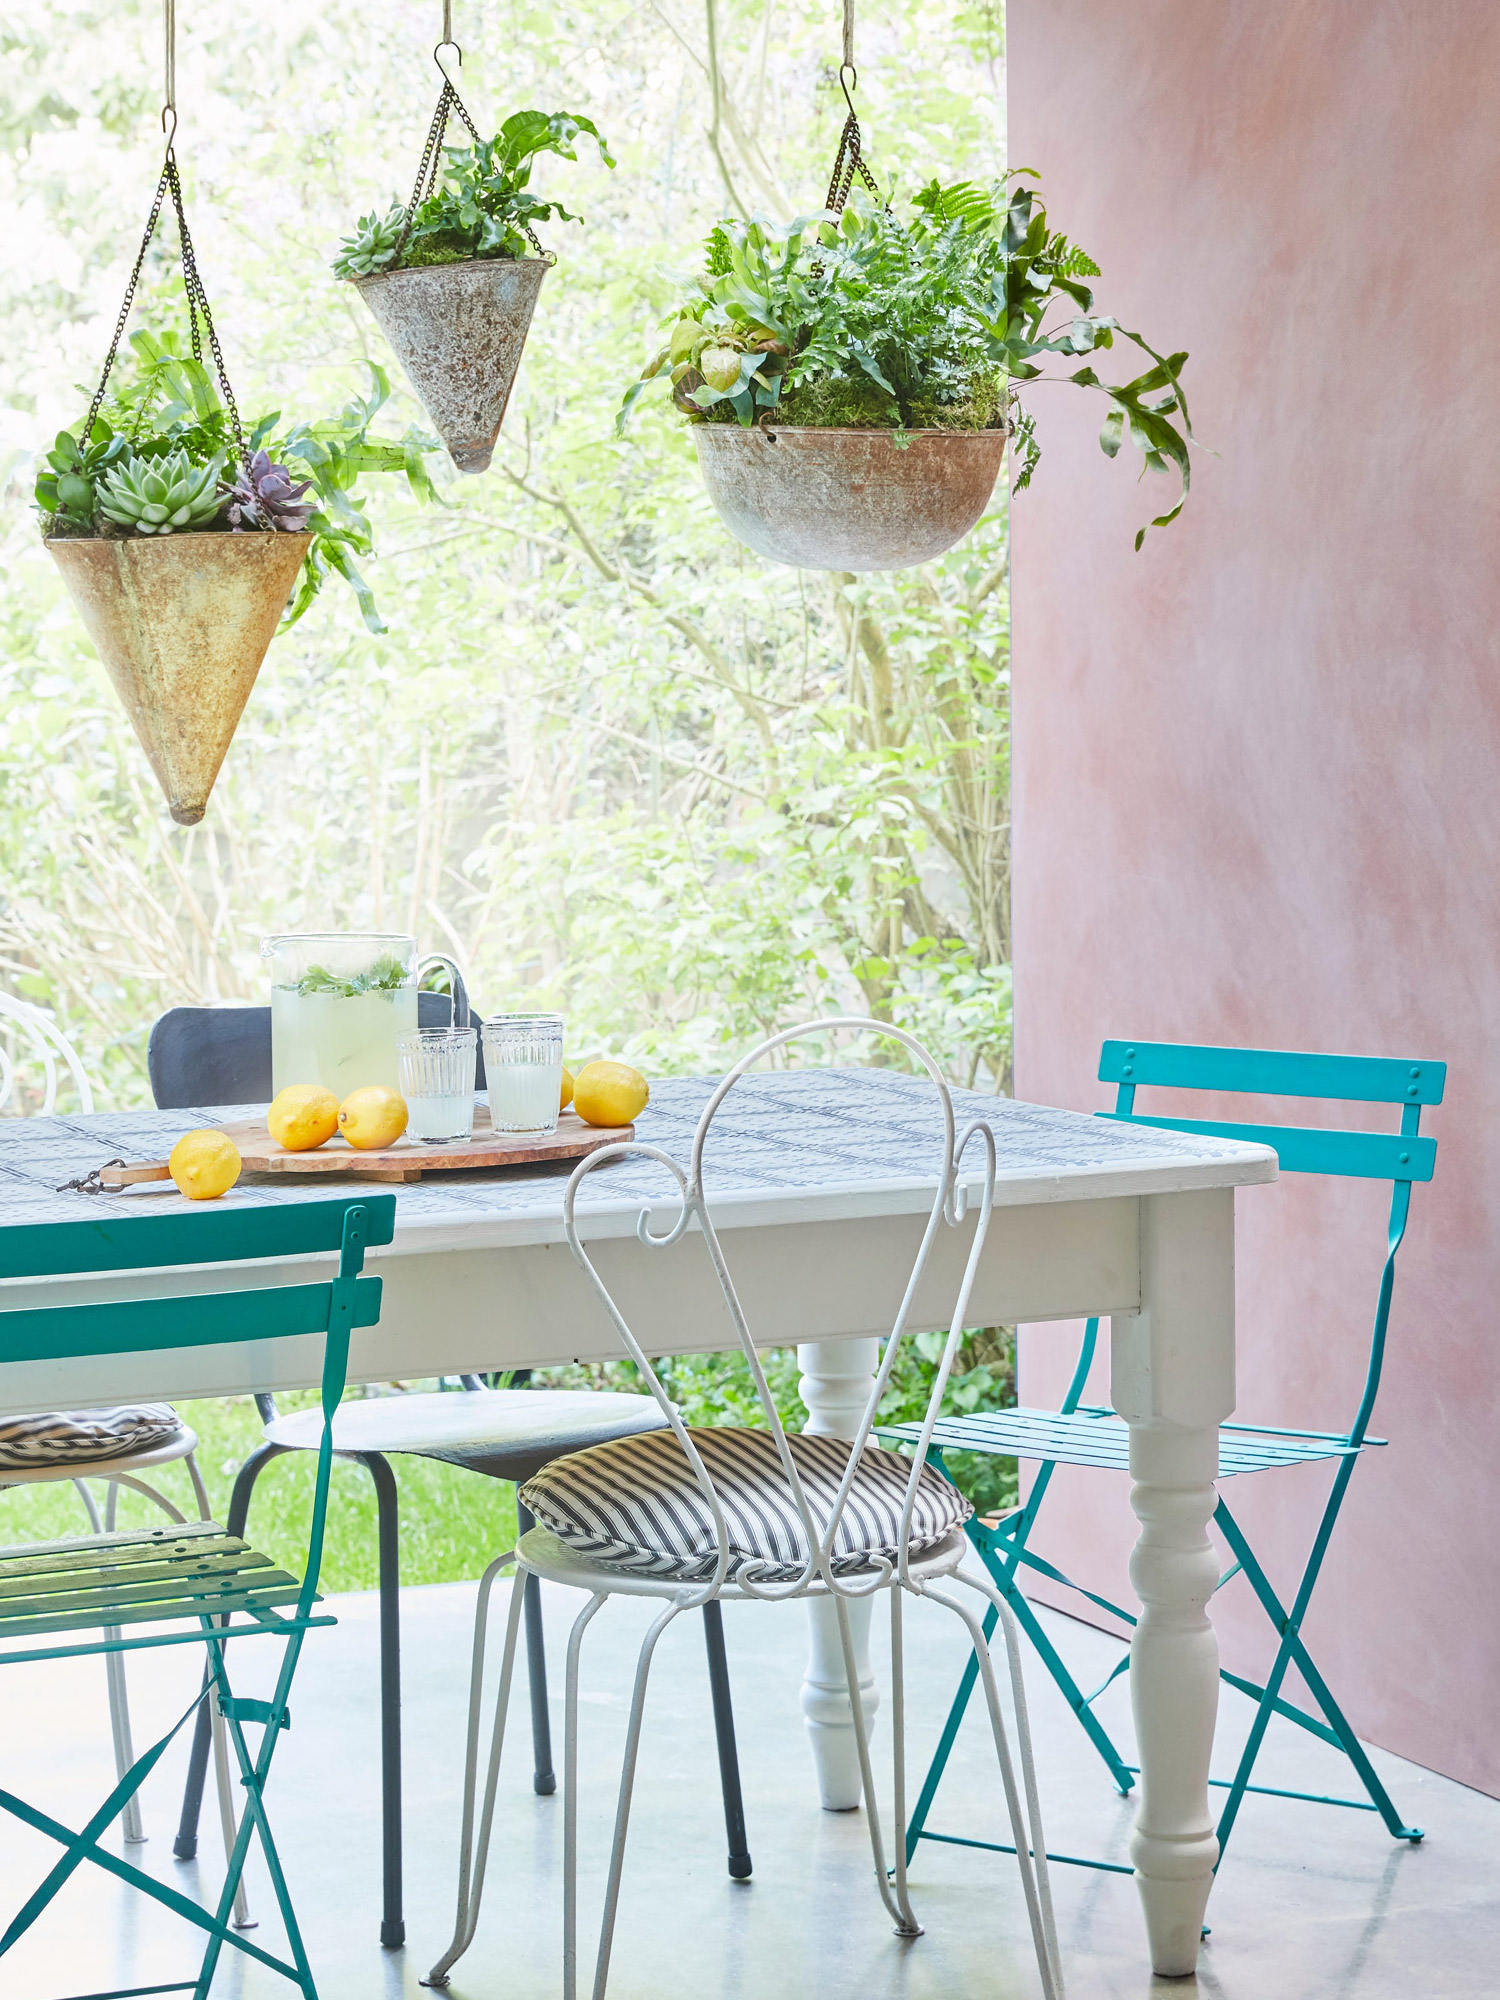 7 Chalk Paint DIY Projects to Try Now, From Kitchen Cabinets to